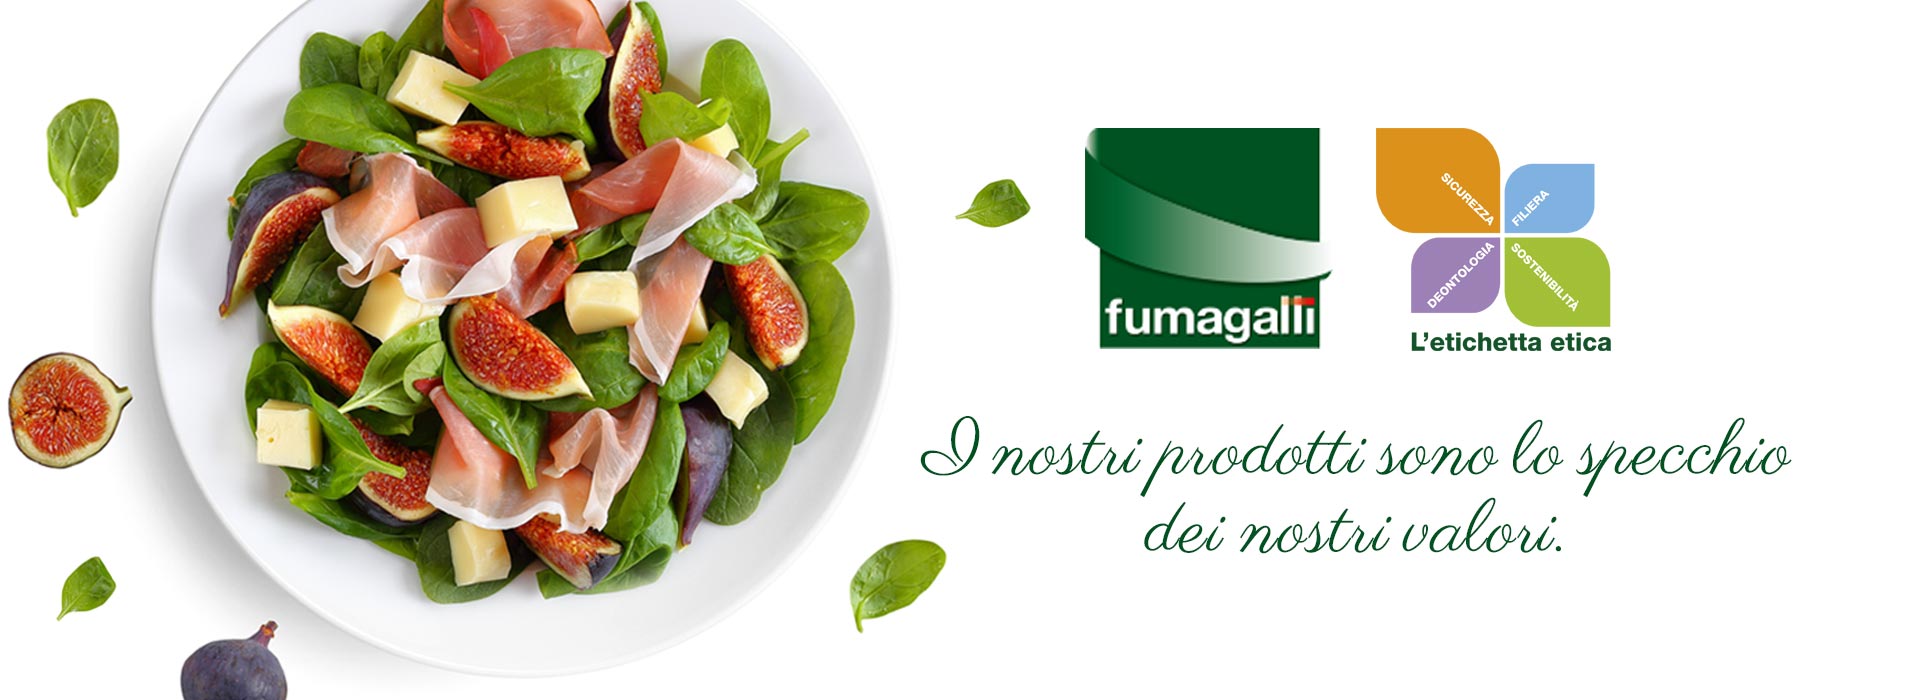 Fumagali salumi ethical label, family values, our products reflect our values